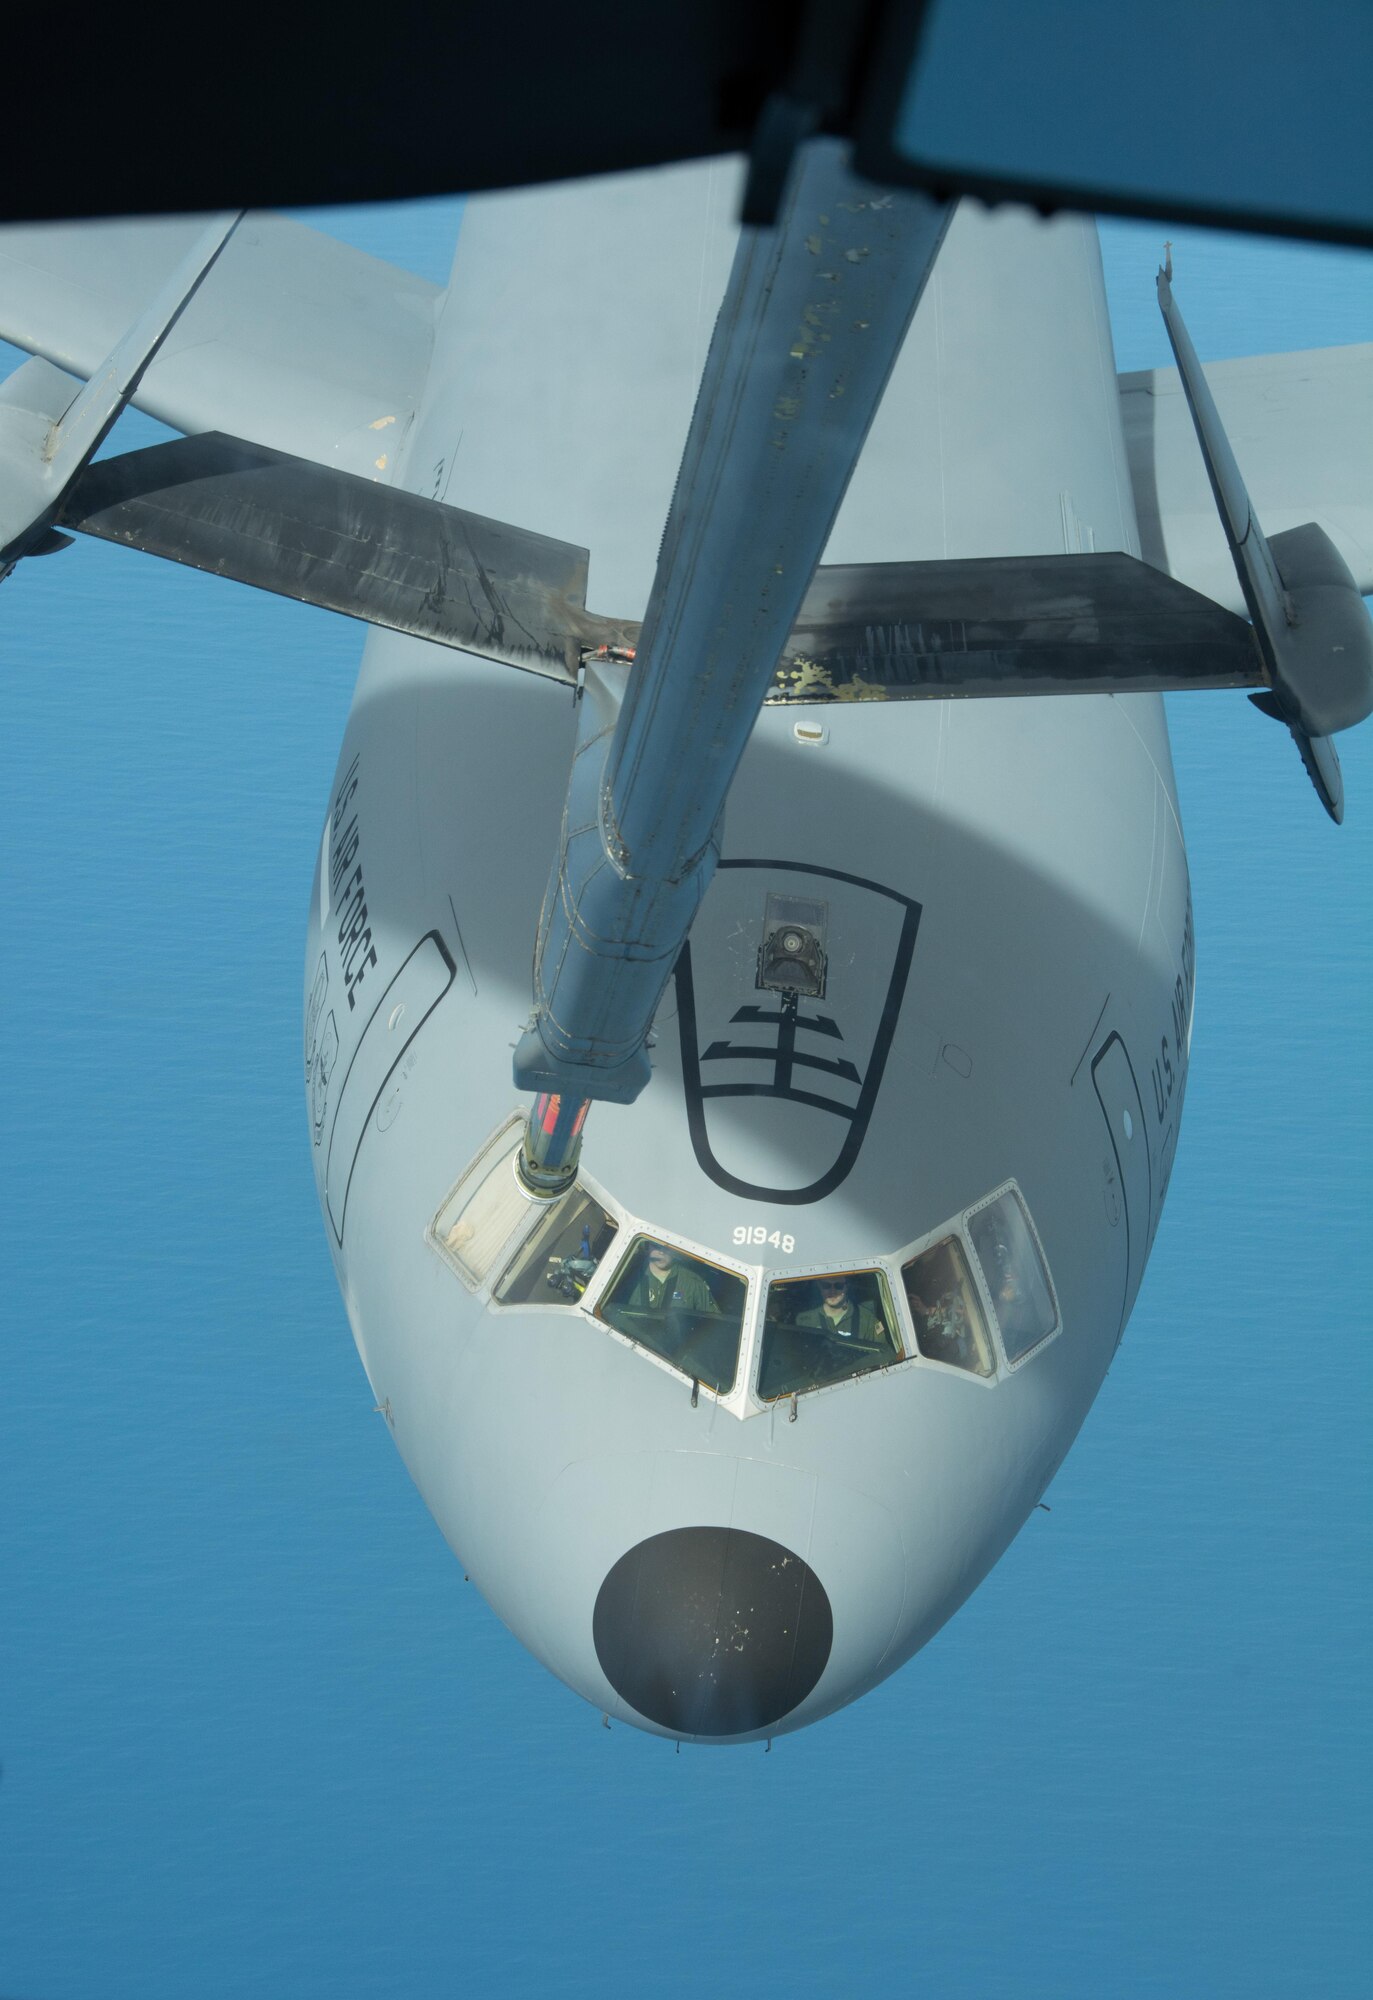 Aircrews from the 79th Air Refuleing Squadron executed multiple KC-10 to KC-10 refuelings over the West Coast, Feb. 12, 2017. The tanker crews were taking part in exercise Patriot Wyvern, the 349th Air Mobility Wing's periodic training exercise developed to grow and strengthen primary job skills of Citizen Airmen. (U.S. Air Force photo by Senior Airman Chris Massey)